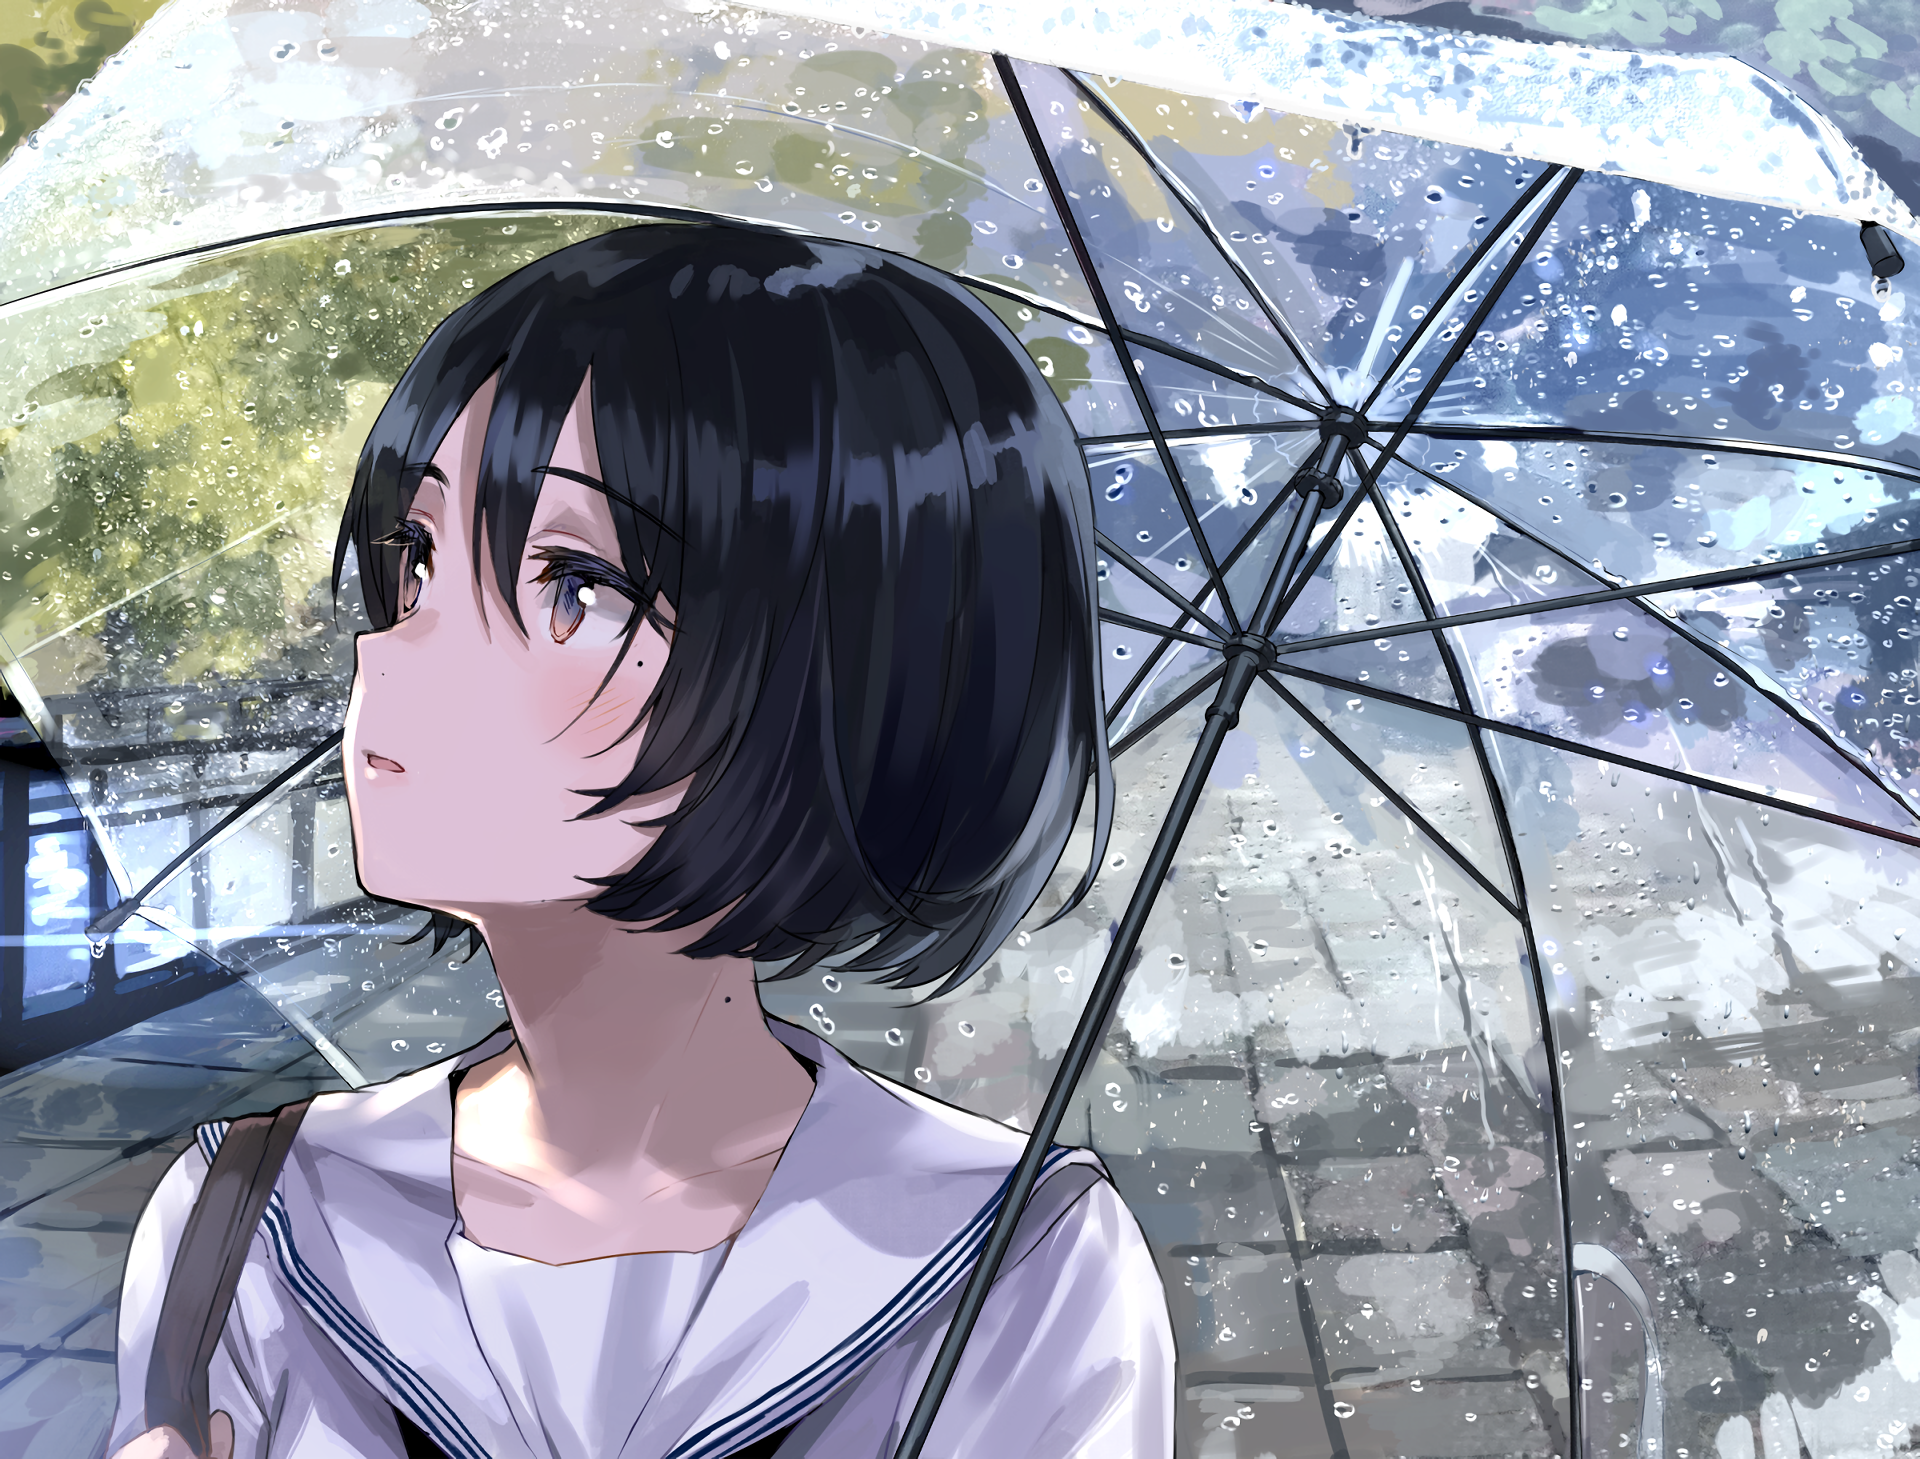 Image of A serious anime girl with short black hair wallpaper